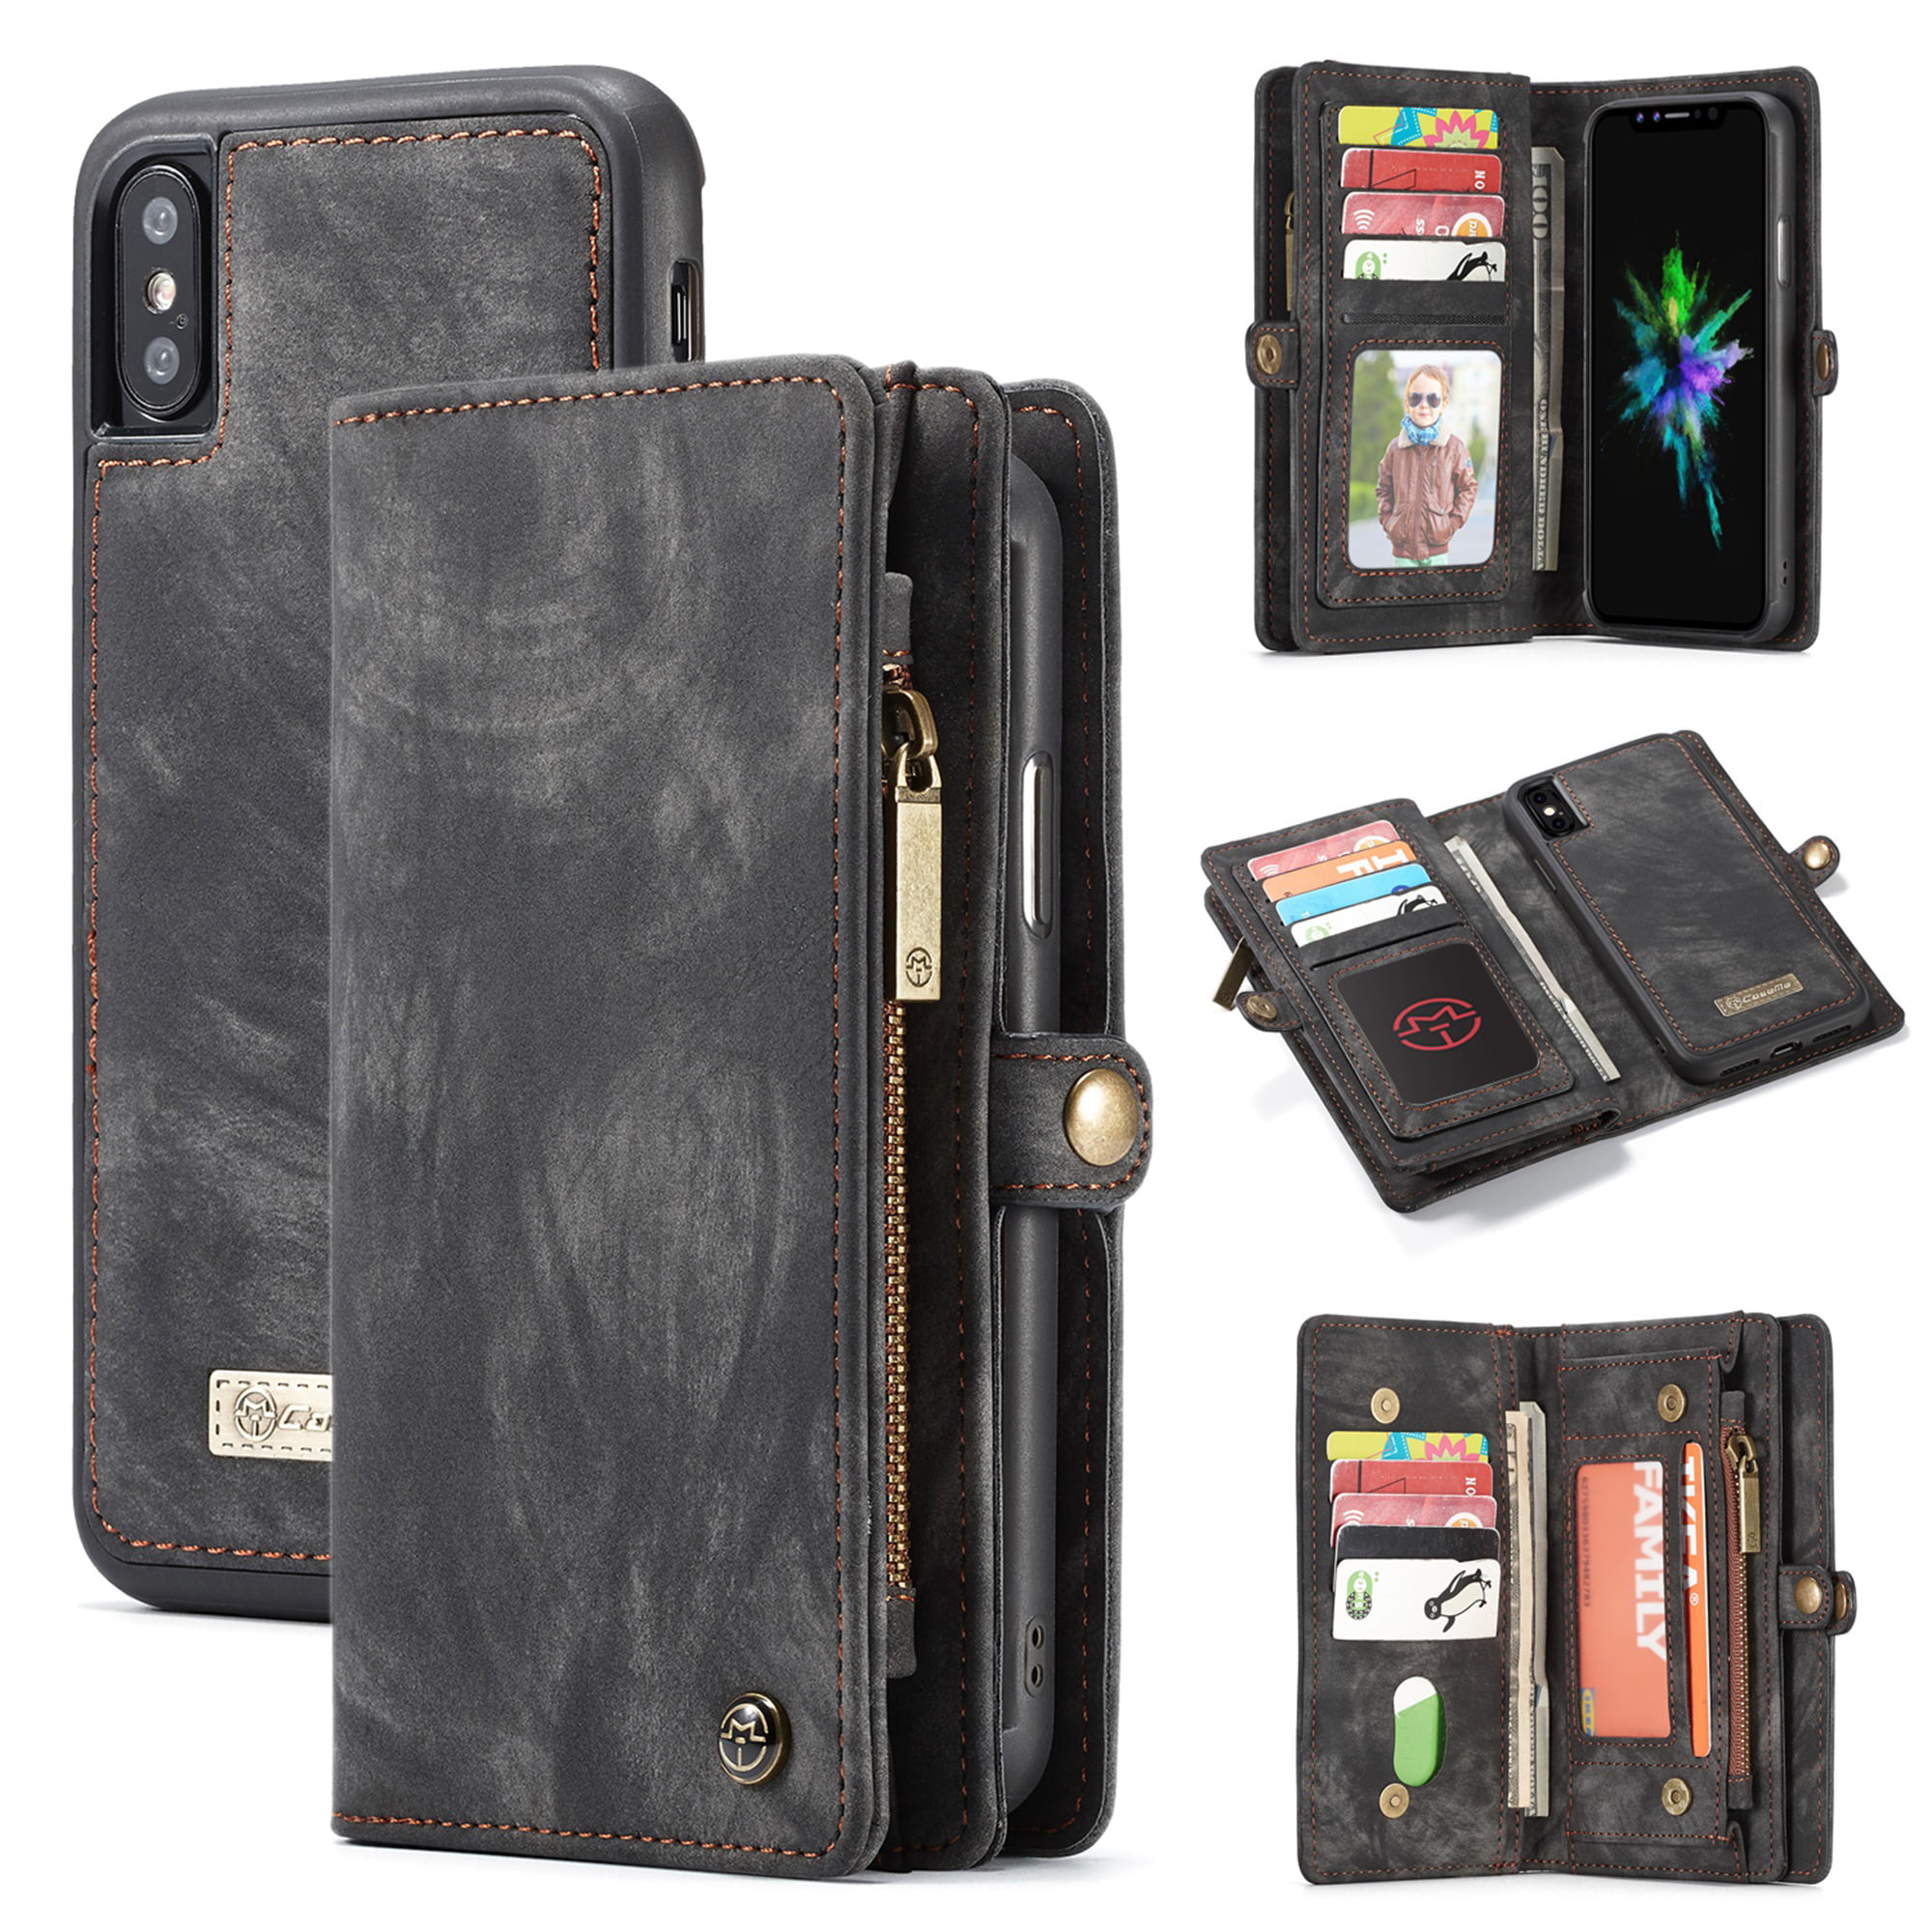 iPhone Xs Case,iPhone X Case,DAMONDY Premium PU Leather Wallet Purse Card Holders Design Kickstand Cover Double Magnetic Clasp Durable Shockproof Soft Bumper Case for iPhone Xs 5.8 Inch-Black